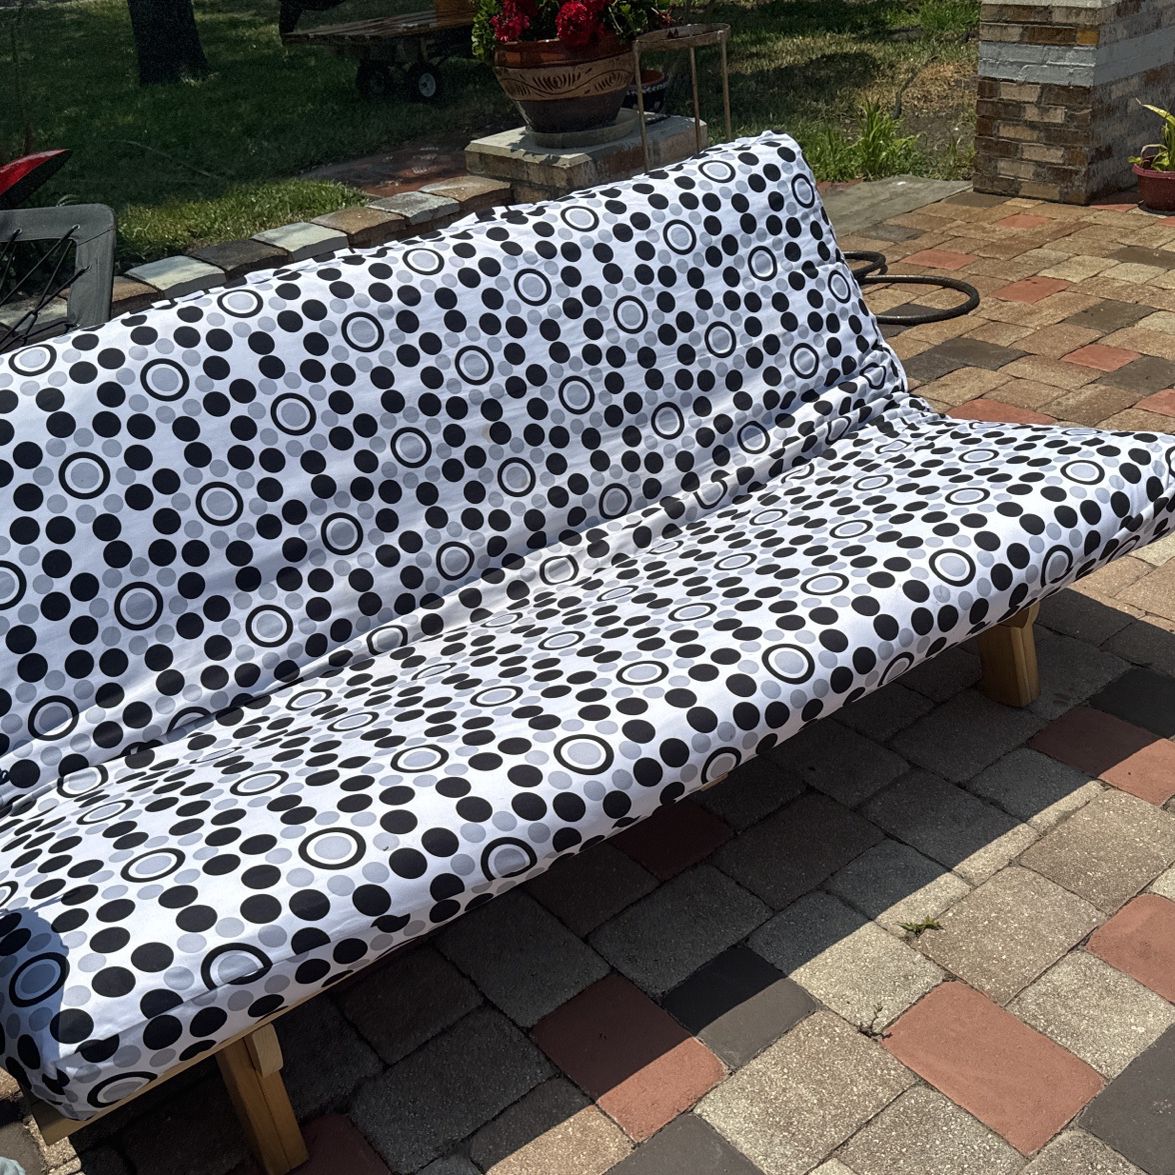 Queen Size Adjustable Futon With Wheels 